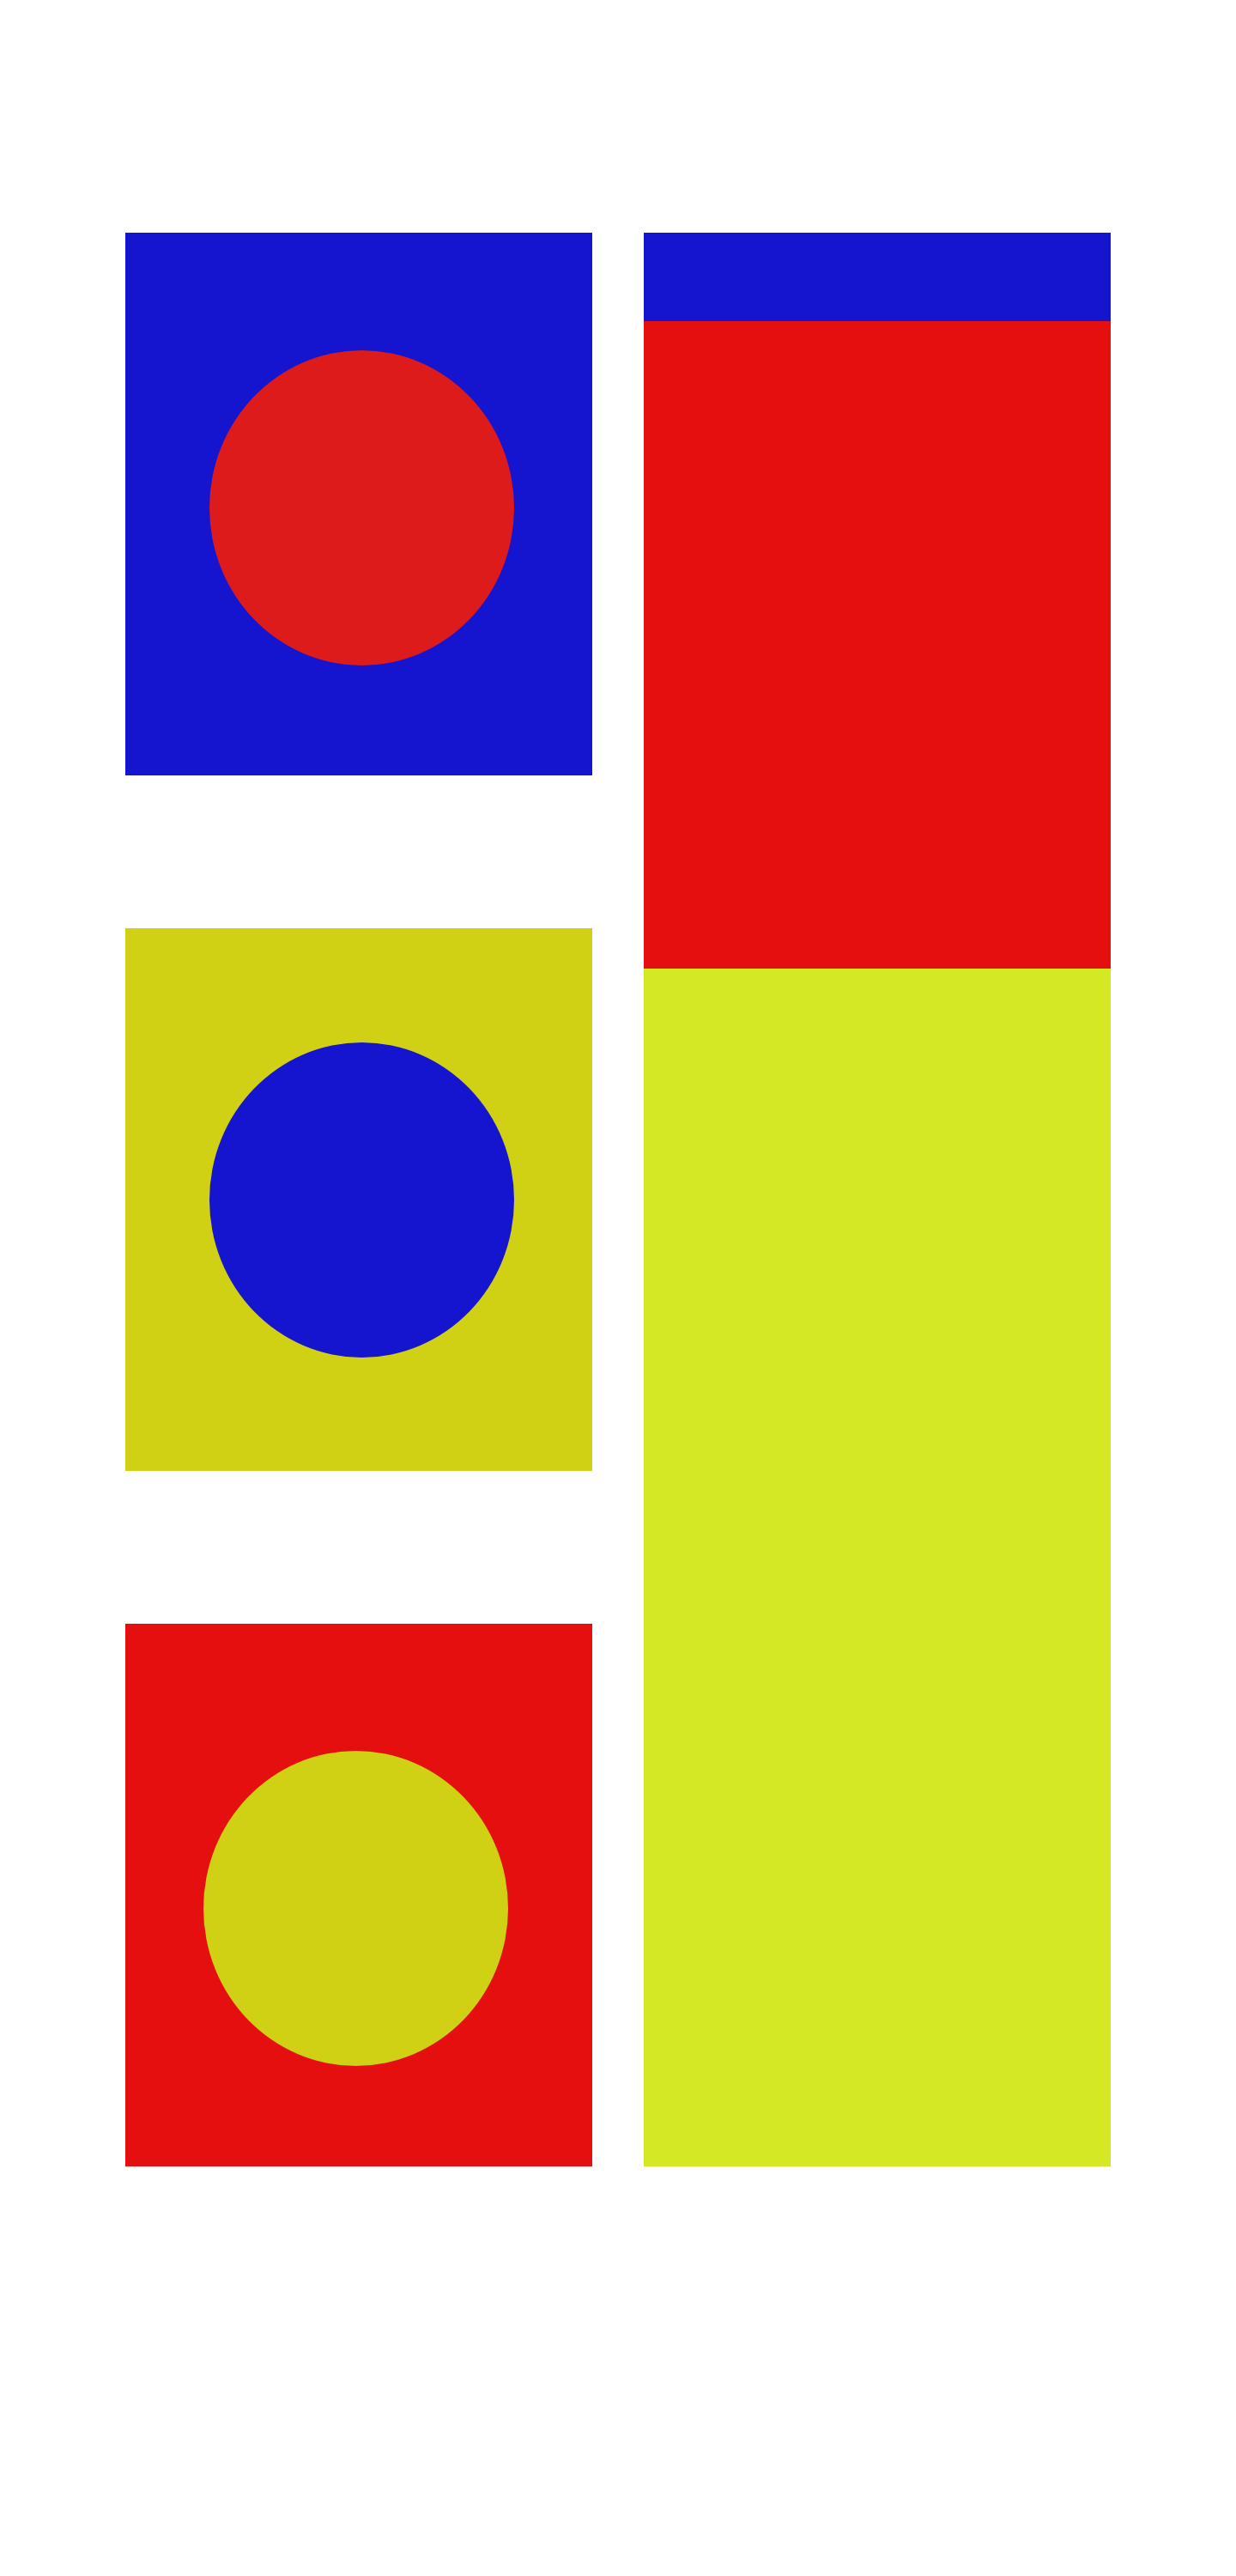 yellow, blue, red and circles and rectangles